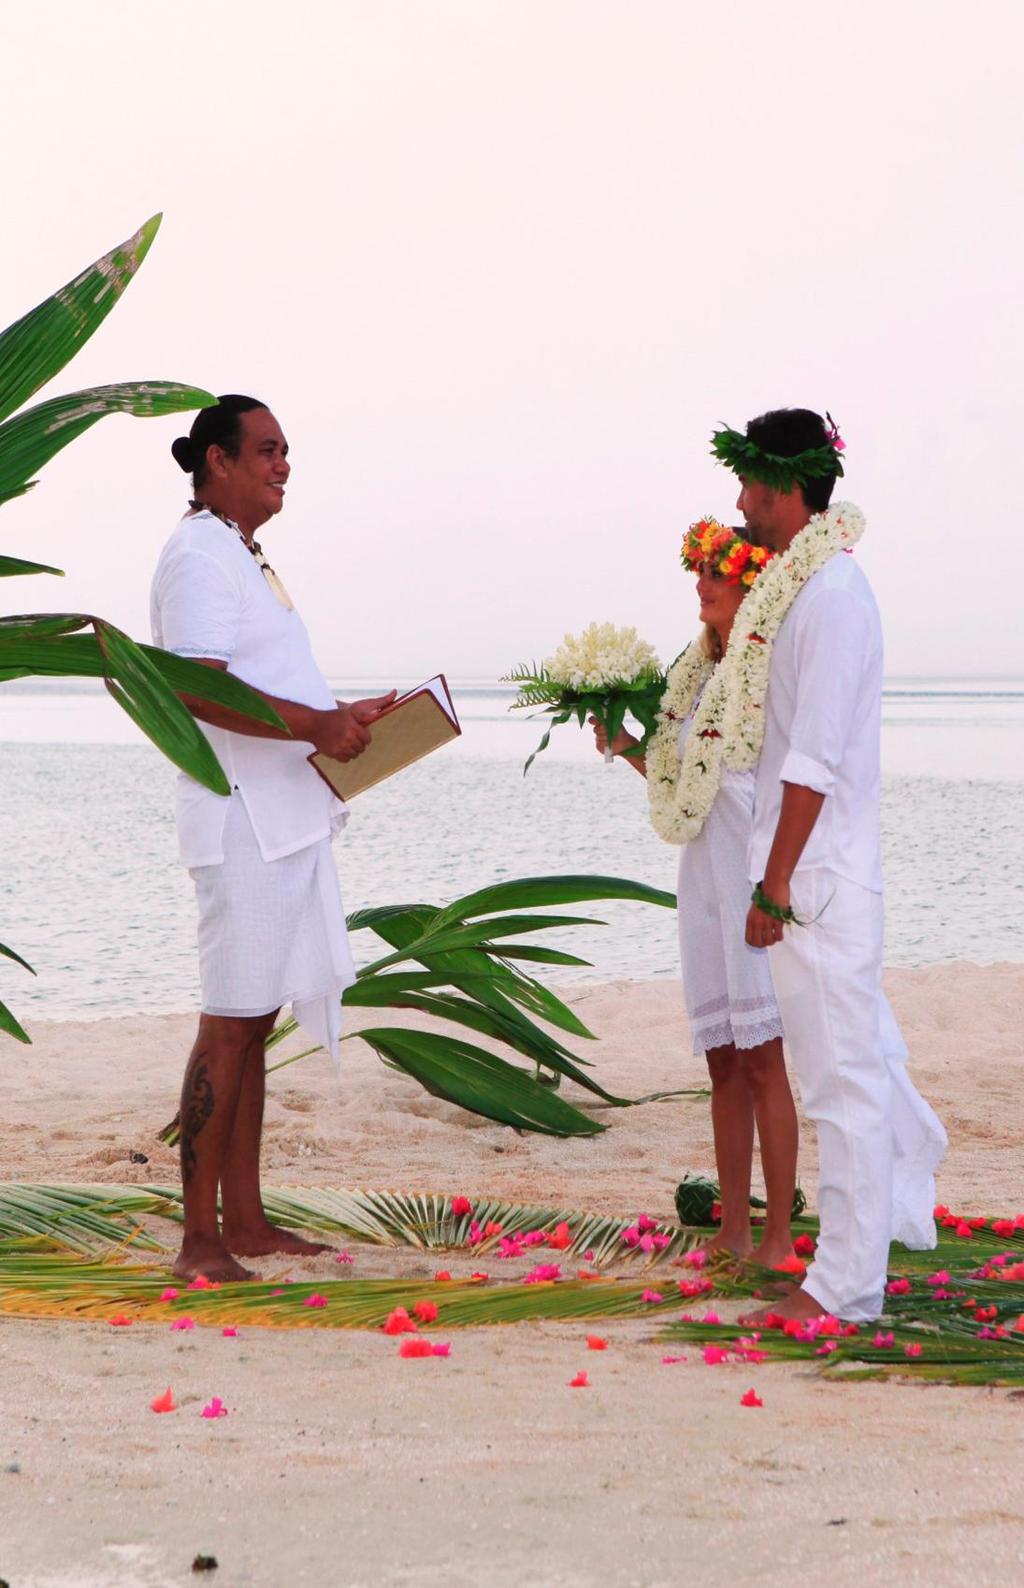 WEDDINGS & HONEYMOONS Between the pink sand beaches and the turquoise blue lagoon, lies Tikehau Pearl Beach Resort: the perfect spot to say "I do".